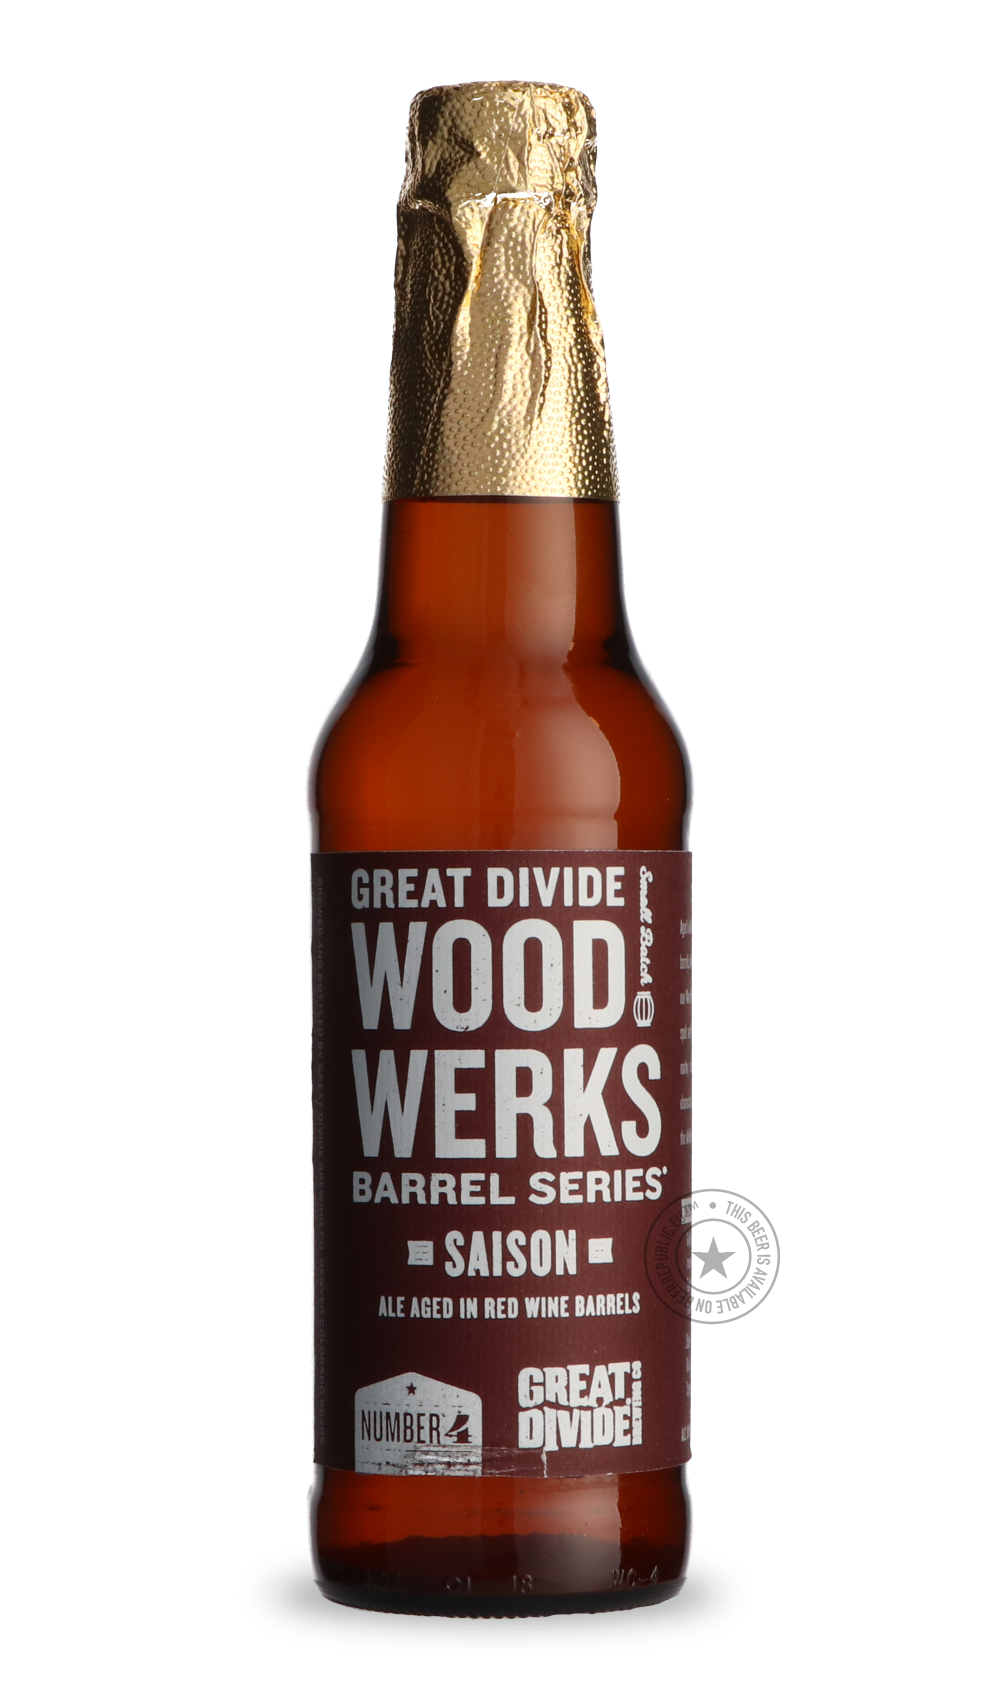 -Great Divide- Wood Werks Barrel Series #4-Sour / Wild & Fruity- Only @ Beer Republic - The best online beer store for American & Canadian craft beer - Buy beer online from the USA and Canada - Bier online kopen - Amerikaans bier kopen - Craft beer store - Craft beer kopen - Amerikanisch bier kaufen - Bier online kaufen - Acheter biere online - IPA - Stout - Porter - New England IPA - Hazy IPA - Imperial Stout - Barrel Aged - Barrel Aged Imperial Stout - Brown - Dark beer - Blond - Blonde - Pilsner - Lager 